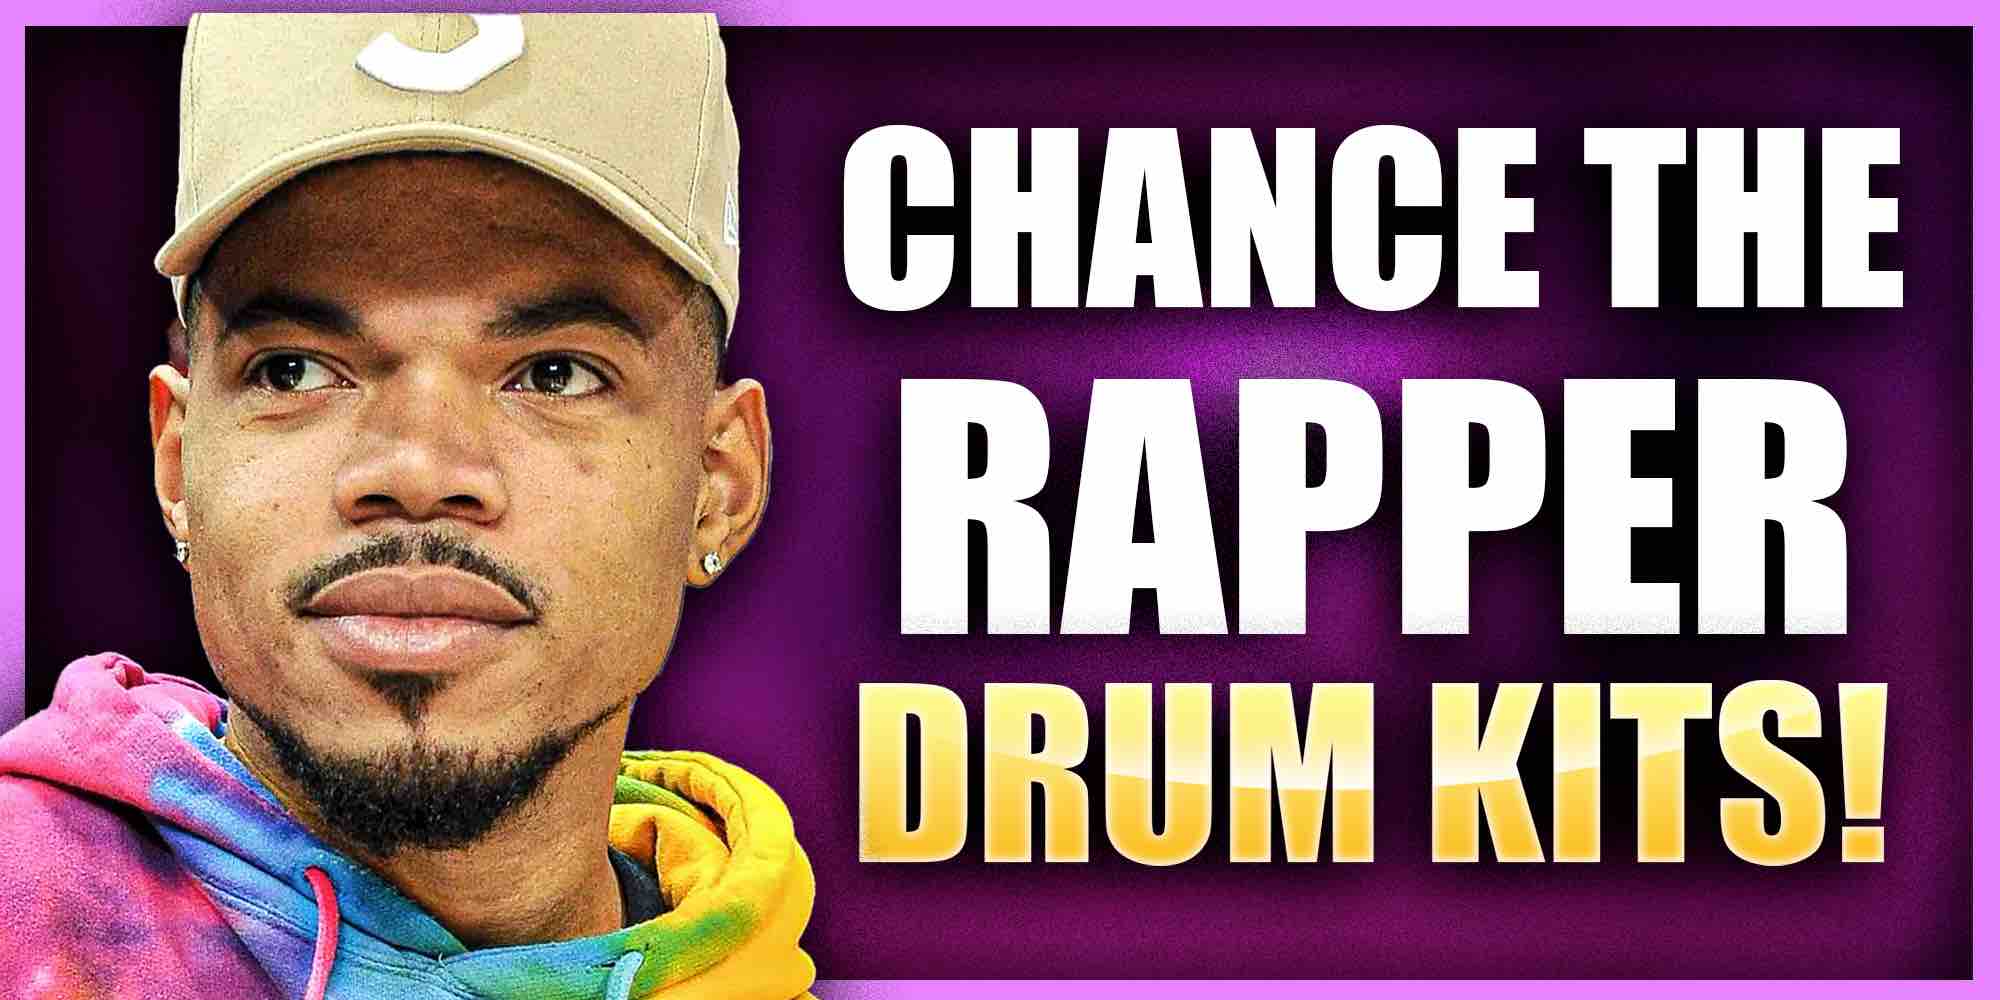 Free Chance The Rapper Drum Kit